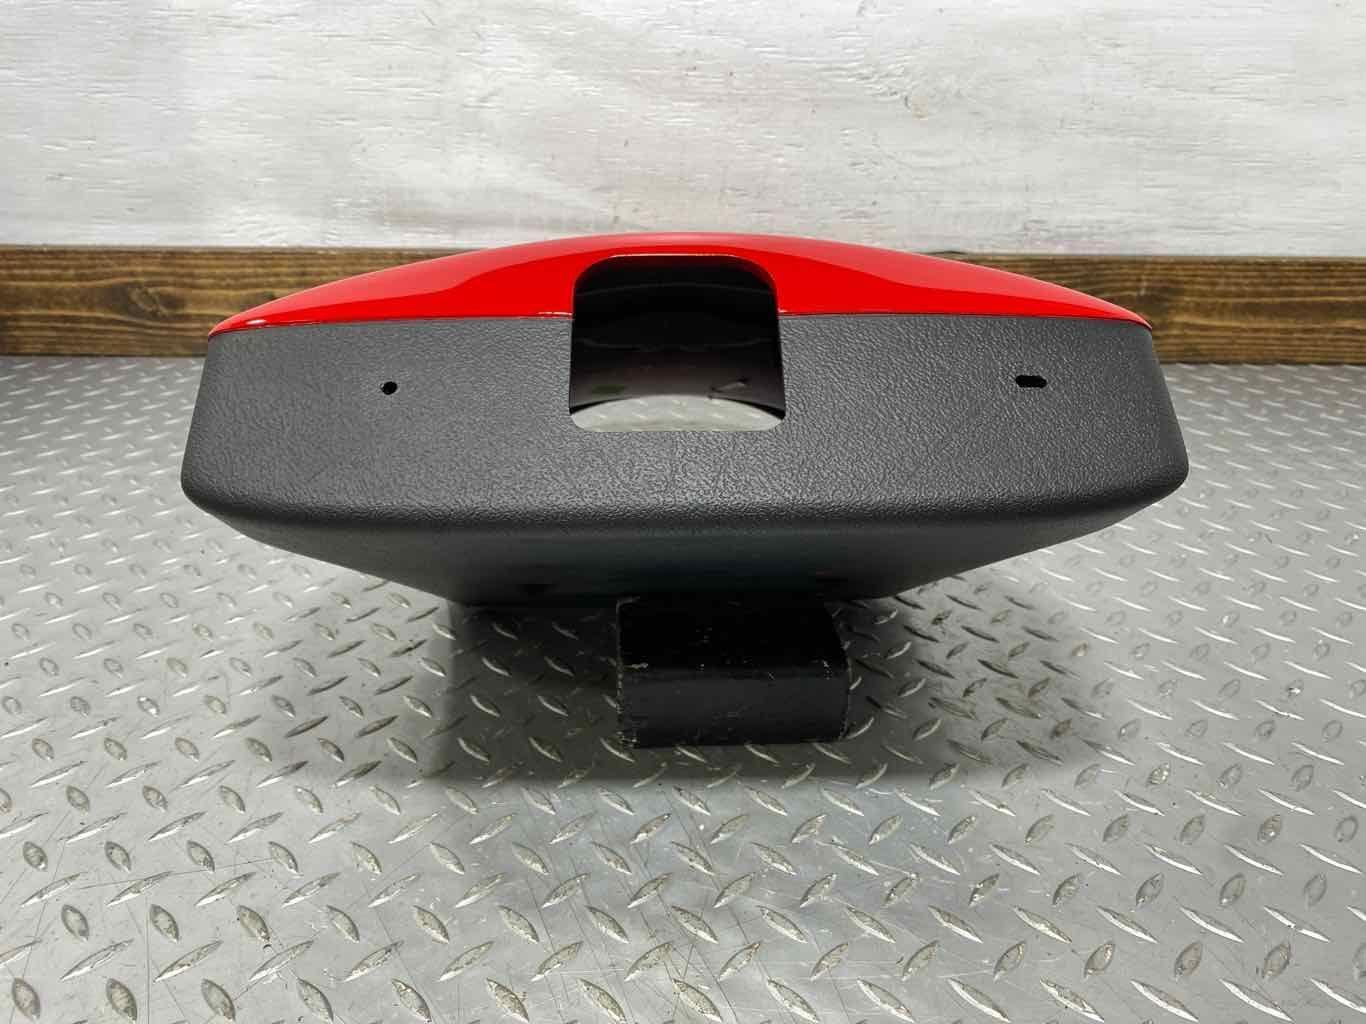 00-04 Corvette C5 Convertible Interior Waterfall Trim (Torch Red 70u)See Notes